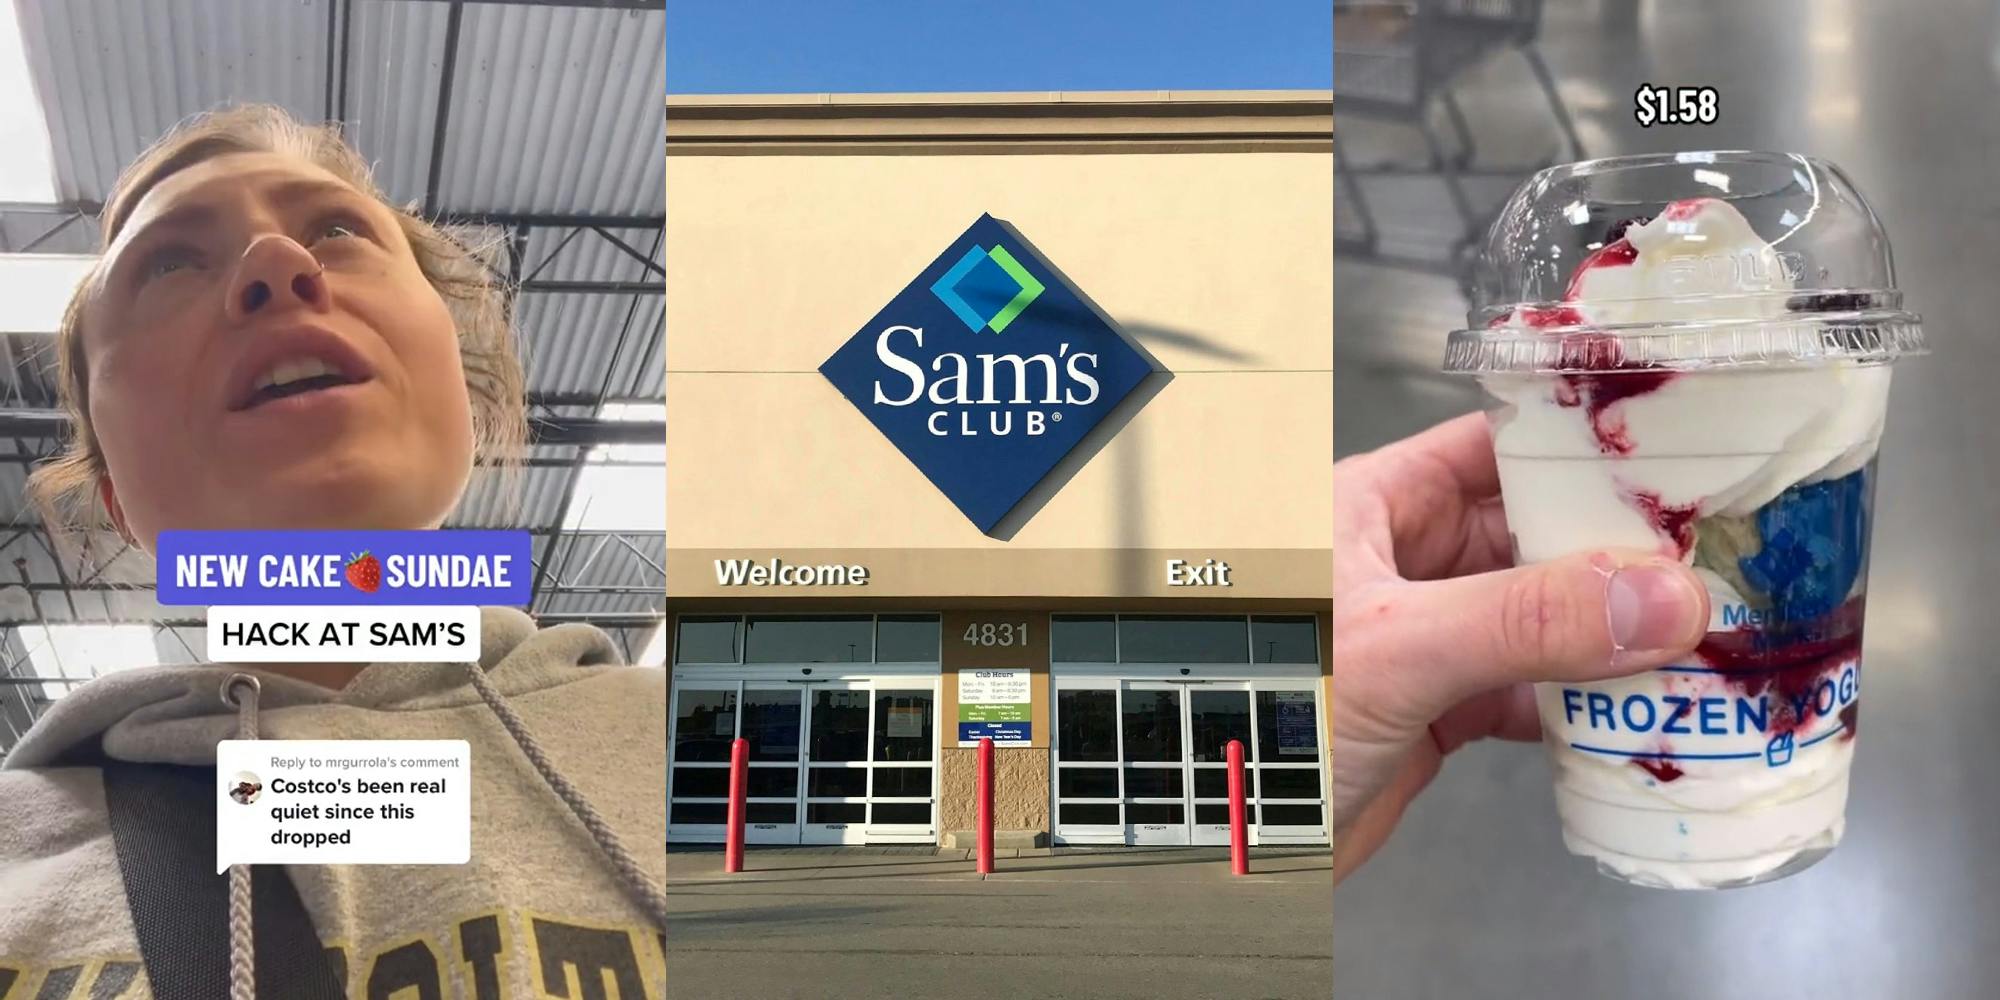 Sam's club customer speaking with caption "New Cake Sudae HACK AT SAM'S" (l) Sam's Club entrance with sign above (c) Sam's Club birthday cake sundae in hand with caption "$1.58" (r)